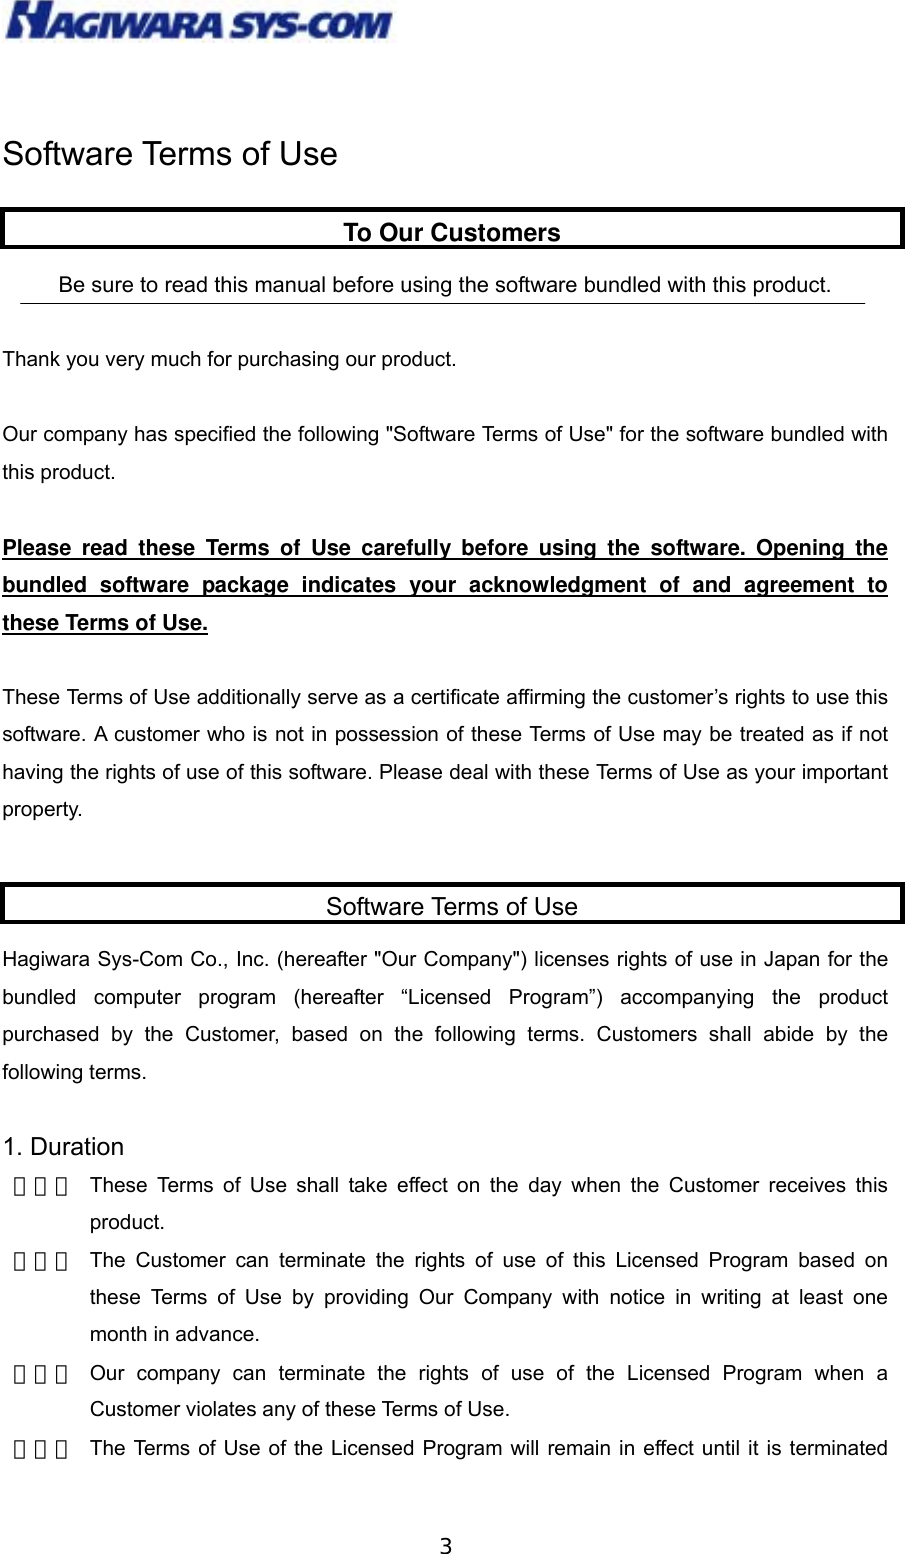  3 Software Terms of Use   Be sure to read this manual before using the software bundled with this product.    Thank you very much for purchasing our product.  Our company has specified the following &quot;Software Terms of Use&quot; for the software bundled with this product.  Please read these Terms of Use carefully before using the software. Opening the bundled software package indicates your acknowledgment of and agreement to these Terms of Use.  These Terms of Use additionally serve as a certificate affirming the customer’s rights to use this software. A customer who is not in possession of these Terms of Use may be treated as if not having the rights of use of this software. Please deal with these Terms of Use as your important property.    Hagiwara Sys-Com Co., Inc. (hereafter &quot;Our Company&quot;) licenses rights of use in Japan for the bundled computer program (hereafter “Licensed Program”) accompanying the product purchased by the Customer, based on the following terms. Customers shall abide by the following terms.  1. Duration   （１） These Terms of Use shall take effect on the day when the Customer receives this product. （２） The Customer can terminate the rights of use of this Licensed Program based on these Terms of Use by providing Our Company with notice in writing at least one month in advance. （３） Our company can terminate the rights of use of the Licensed Program when a Customer violates any of these Terms of Use. （４） The Terms of Use of the Licensed Program will remain in effect until it is terminated To Our CustomersSoftware Terms of Use